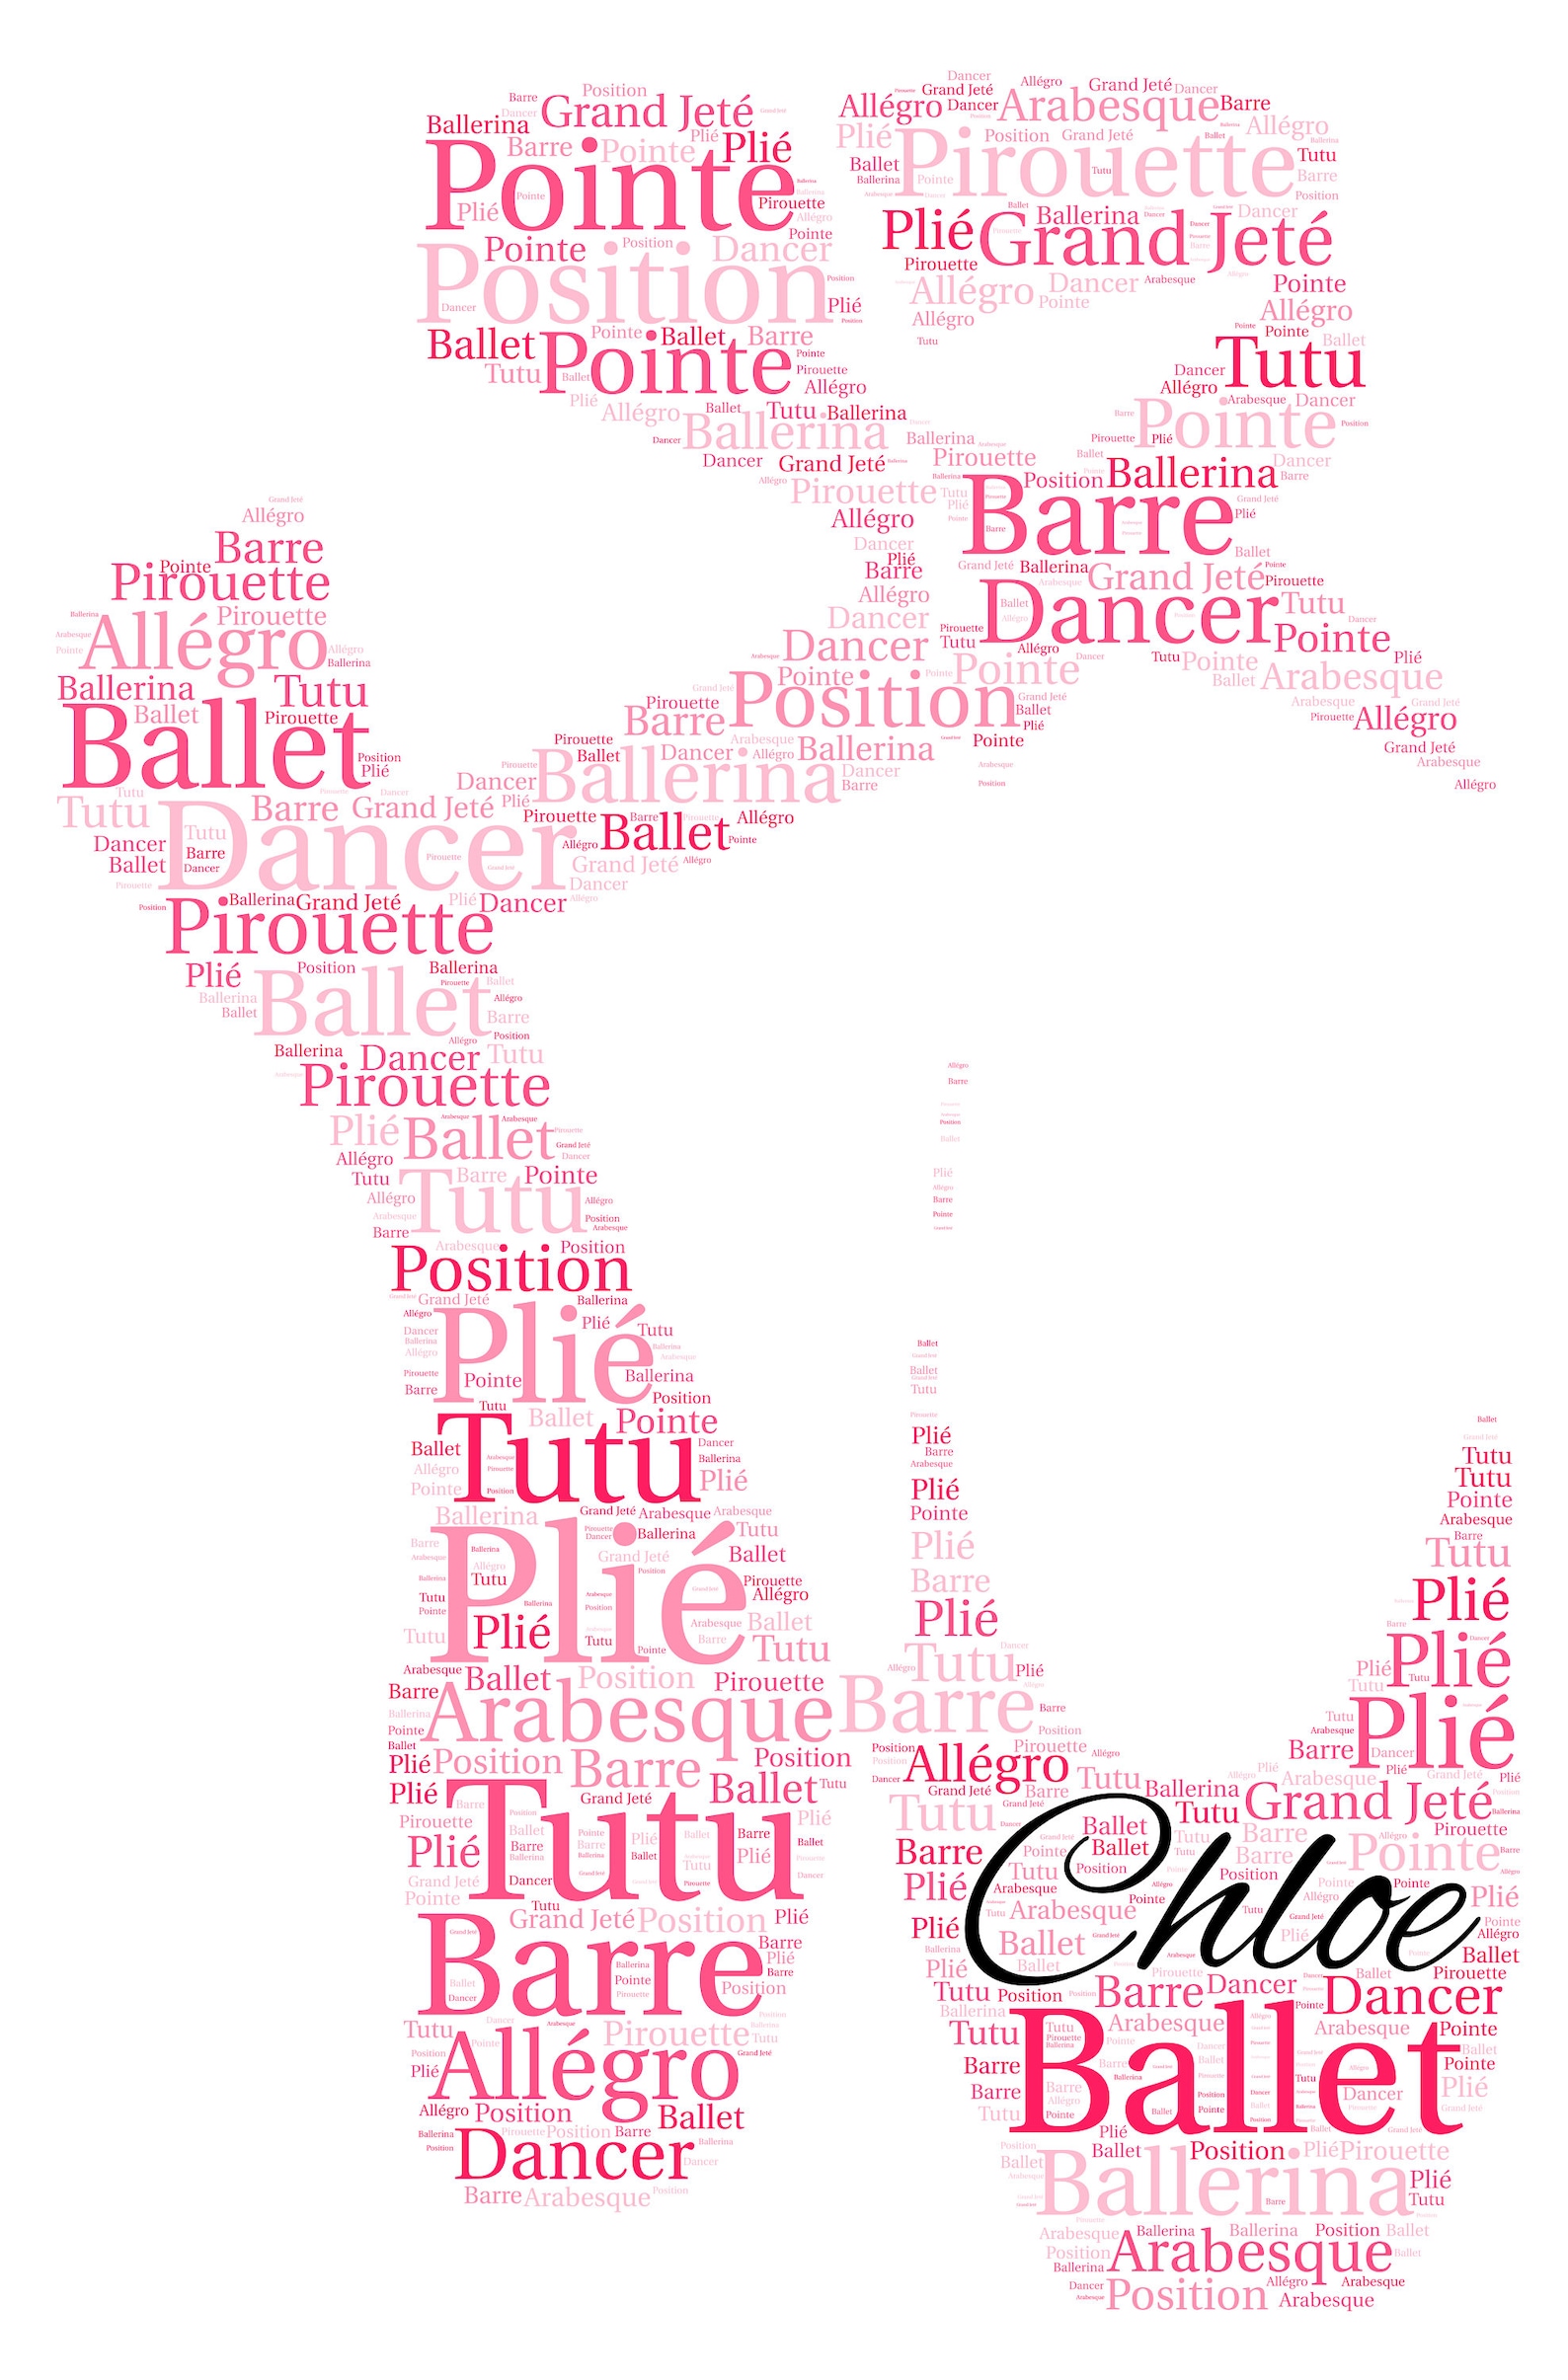 ballet shoes gift, personalised ballet word art, ballet shoes poster, christmas ballet gift, ballerina wall art print, any colou